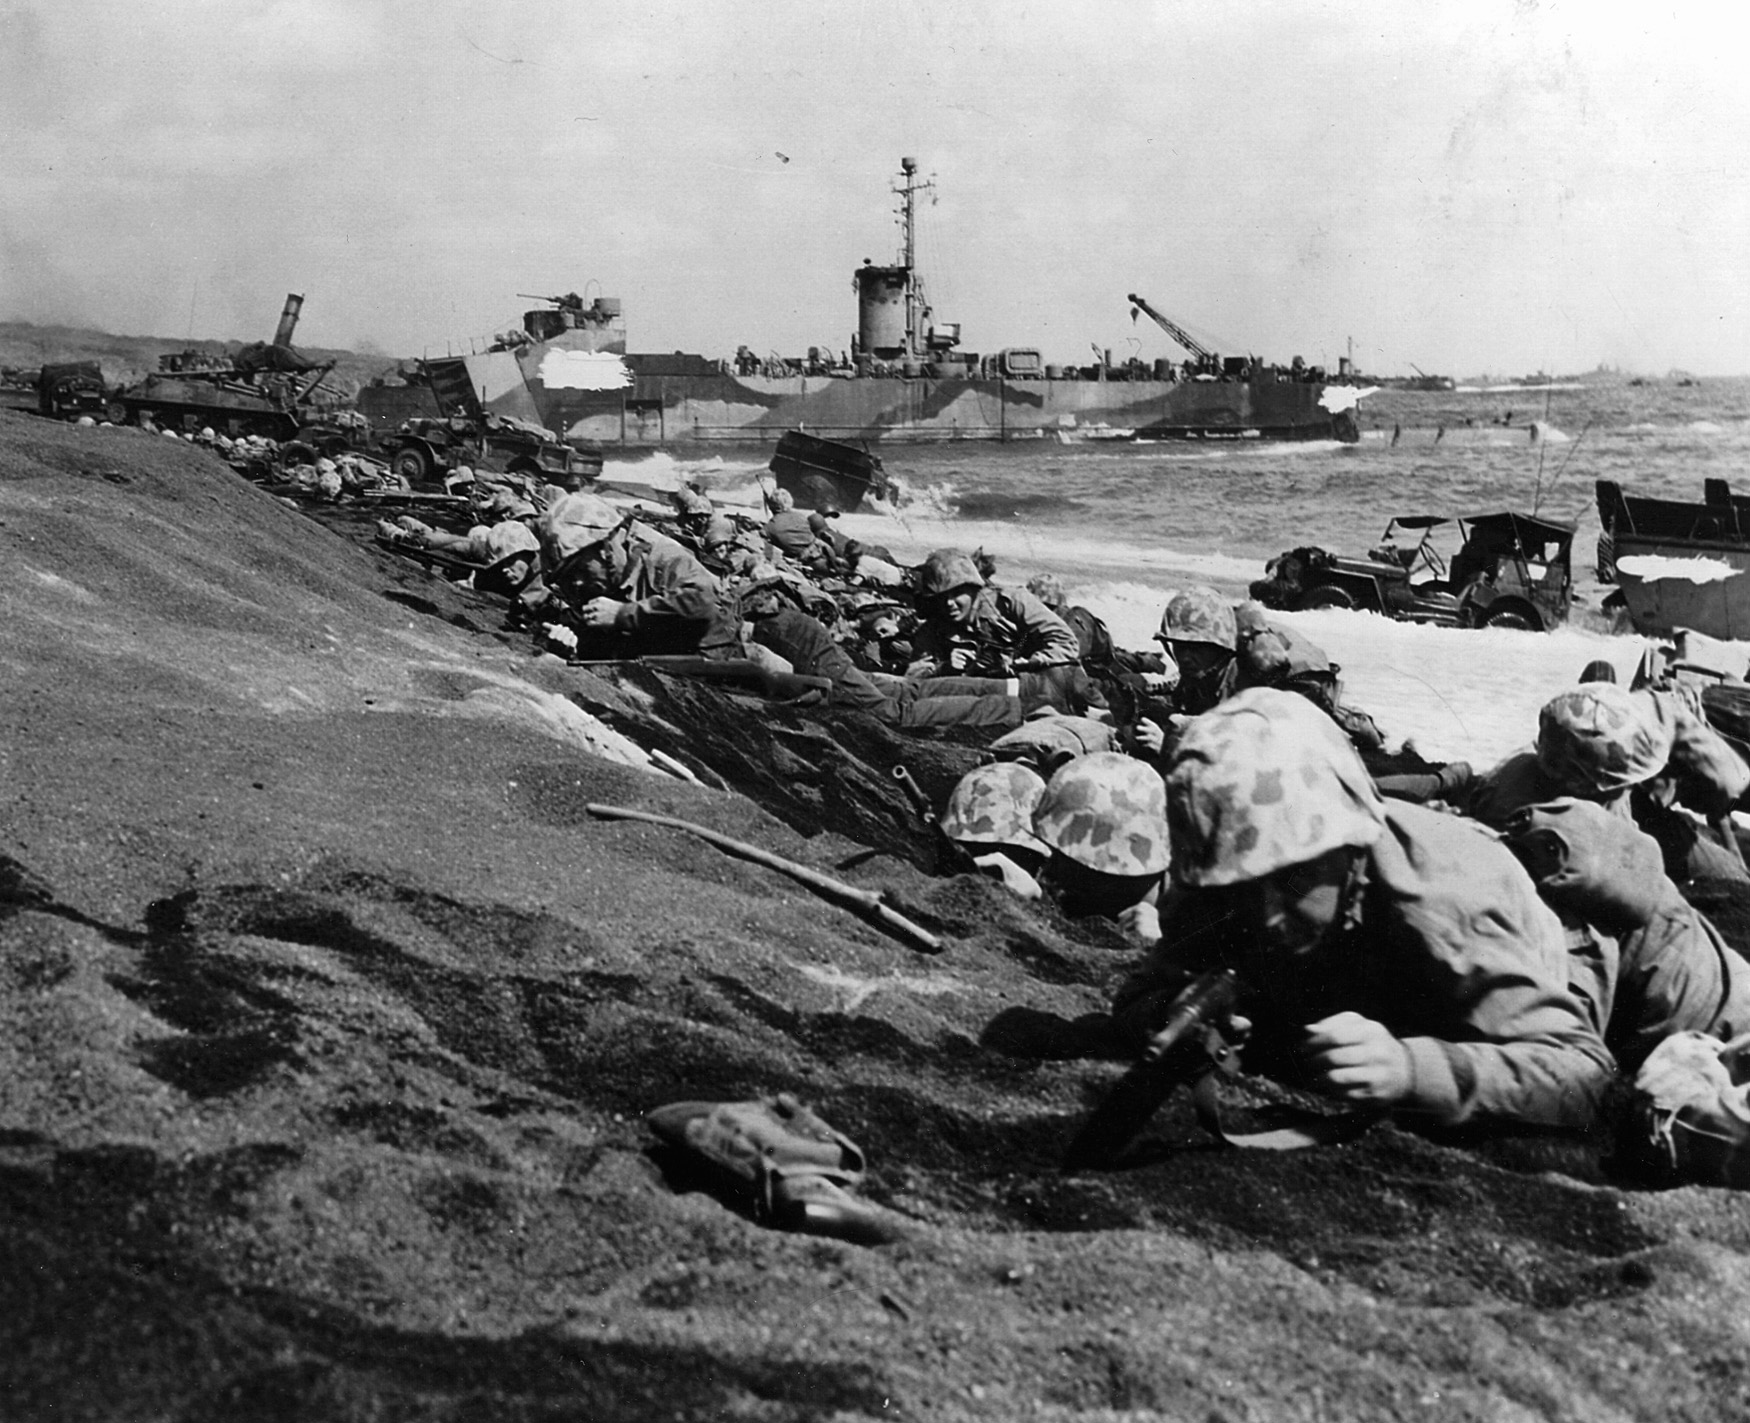 Taking cover from interlocking fields of Japanese mortar, artillery, and small arms fire, troops of the 4th Marine Division lay low on the beach at Iwo Jima. 